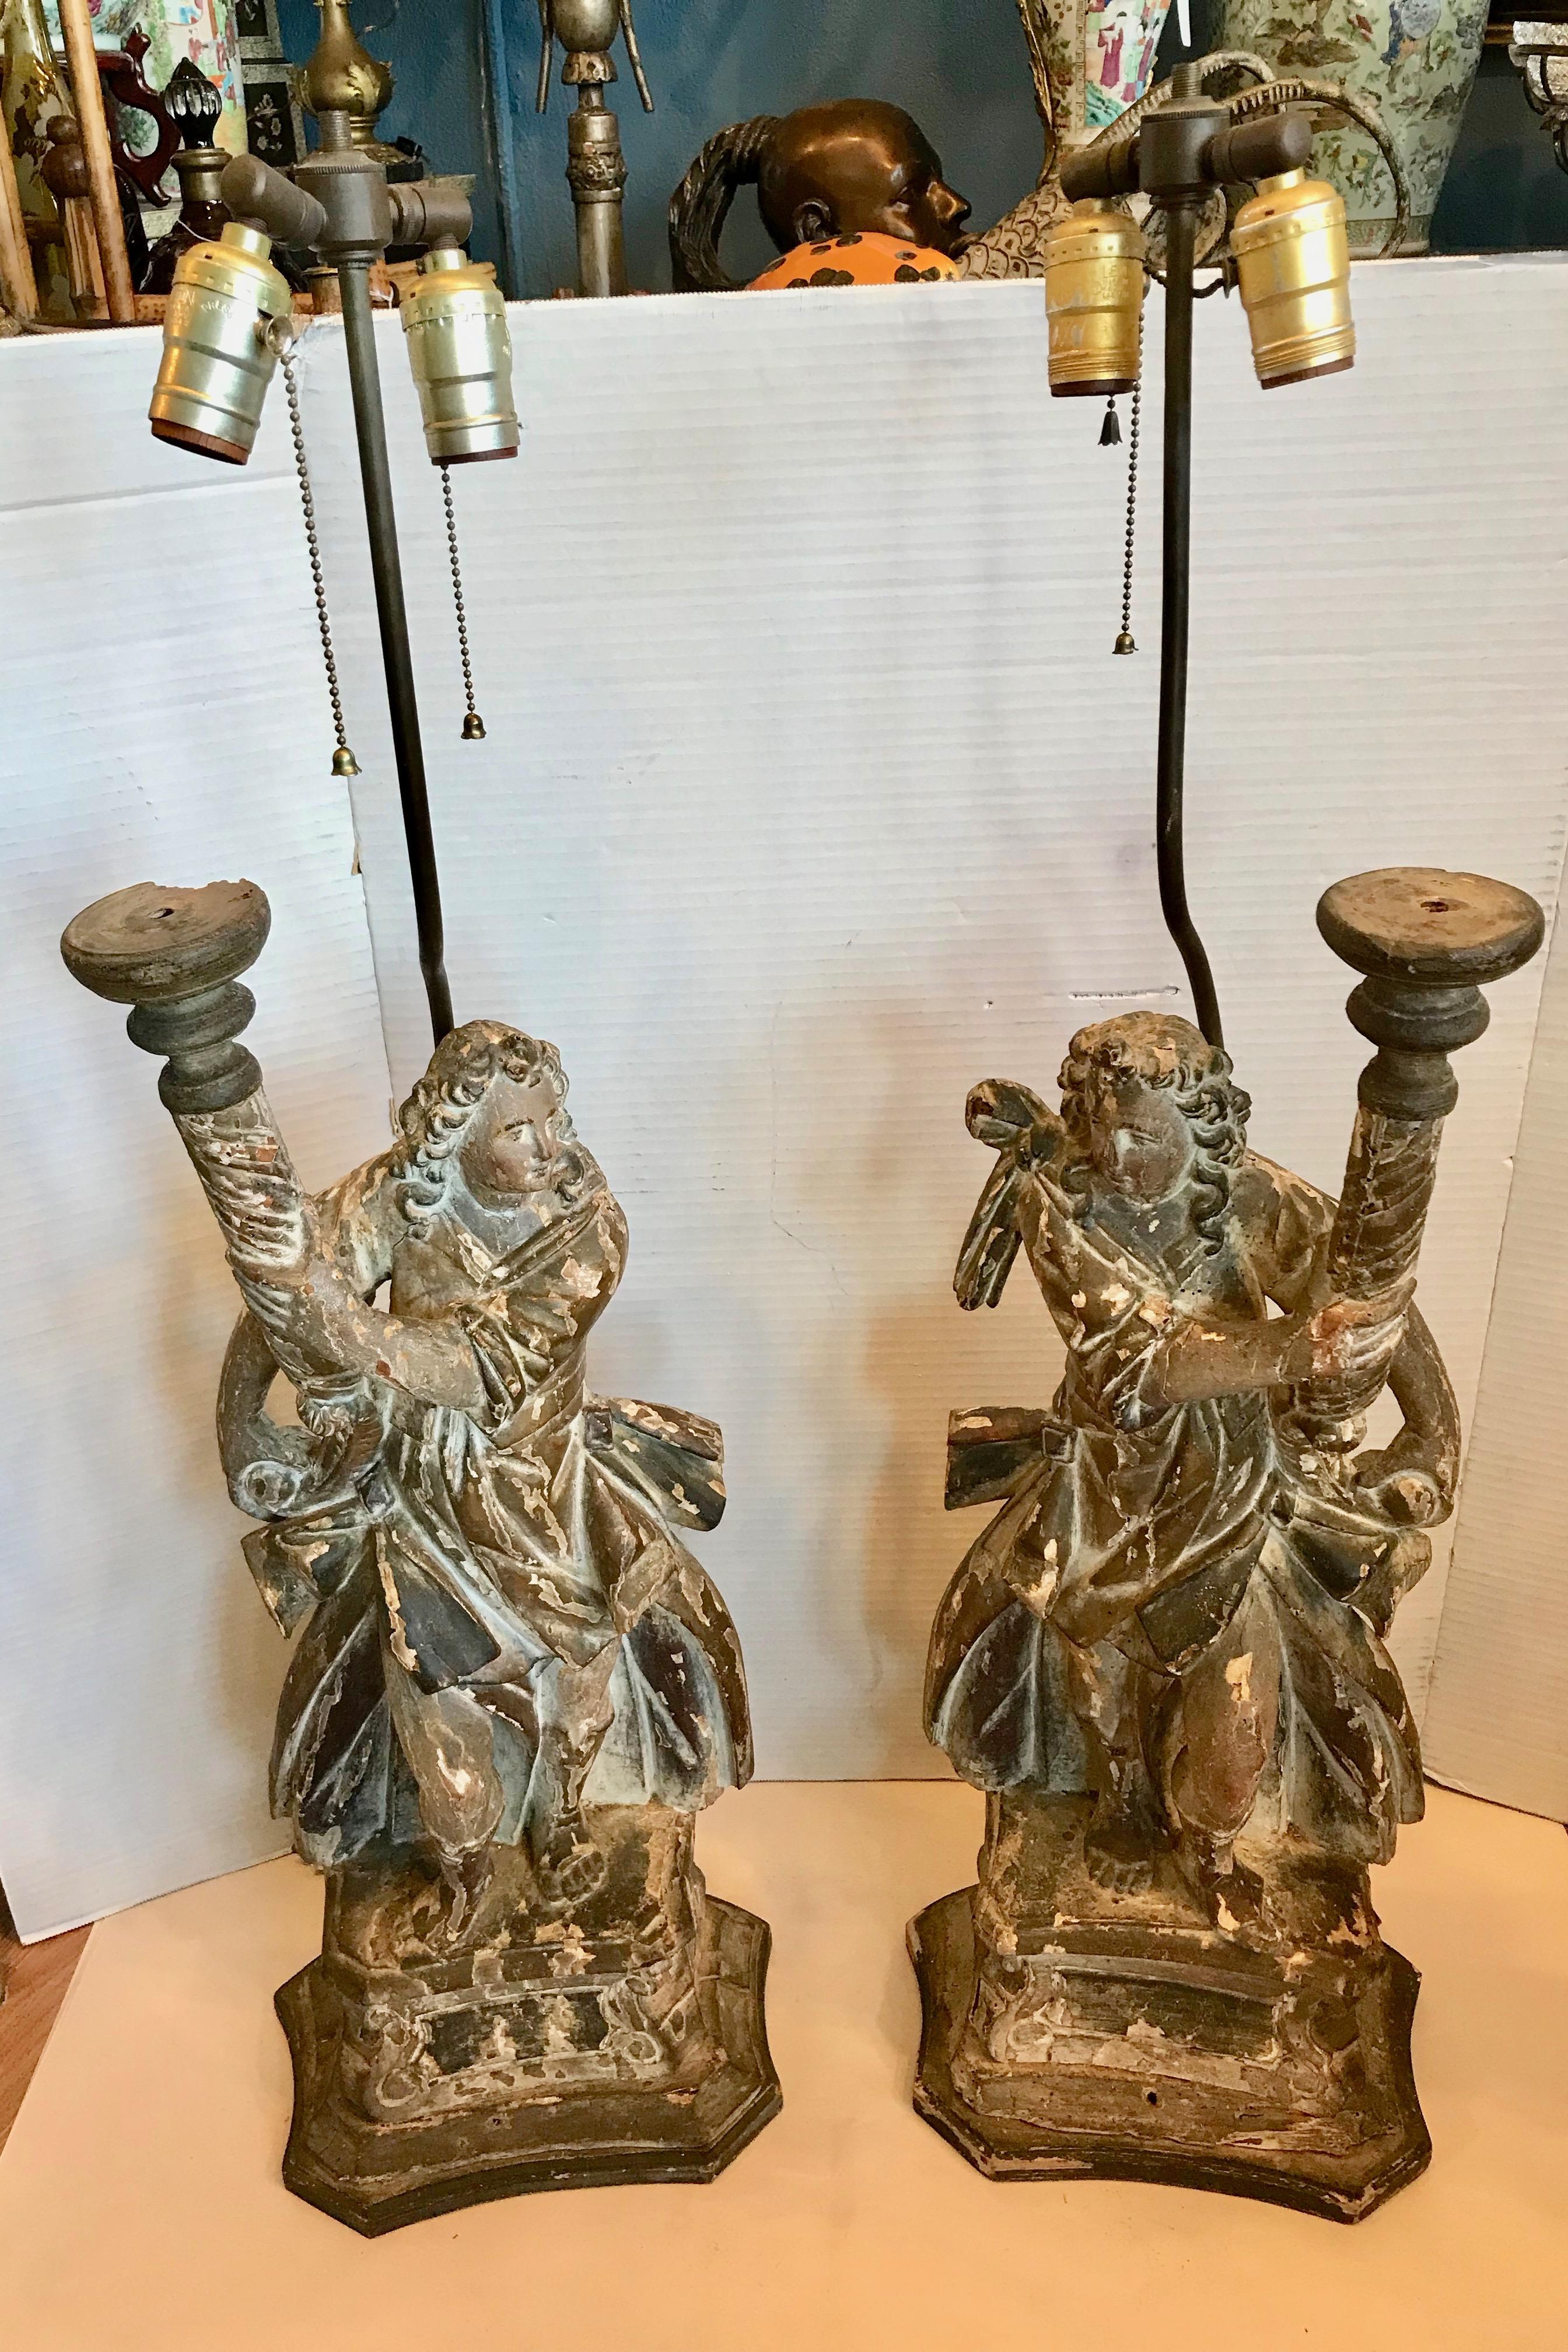 Hand-Carved Pair Of 17TH Century Italian Figural Prickets Now Mounted As Lamps For Sale